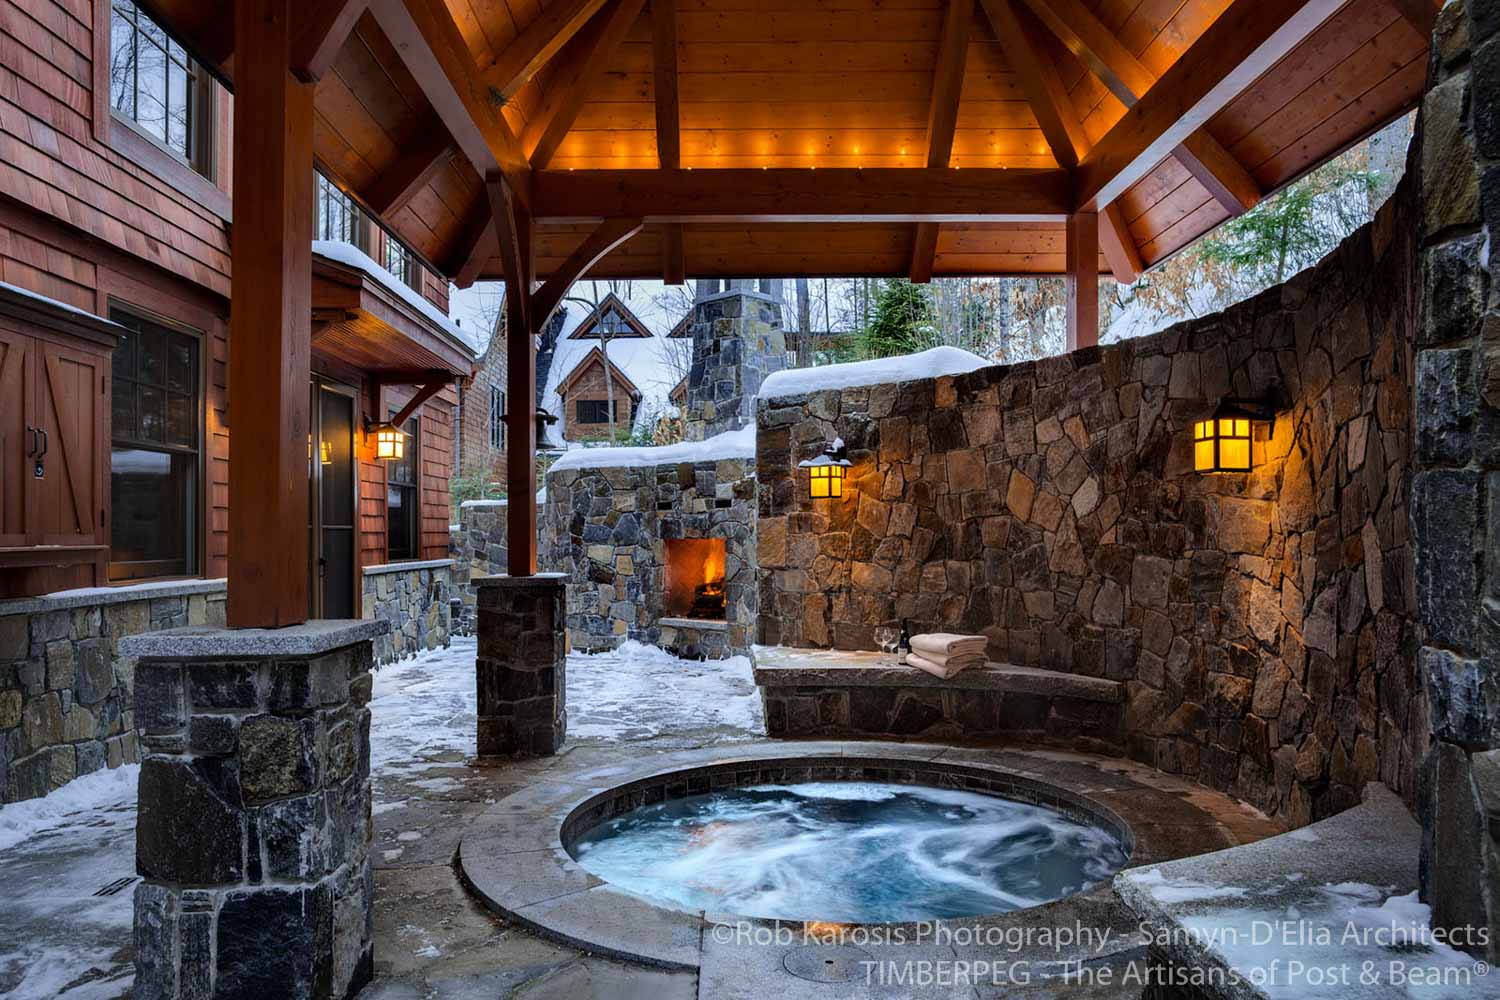 A stone hot tub in a snow covered backyard, perfect for Santa.